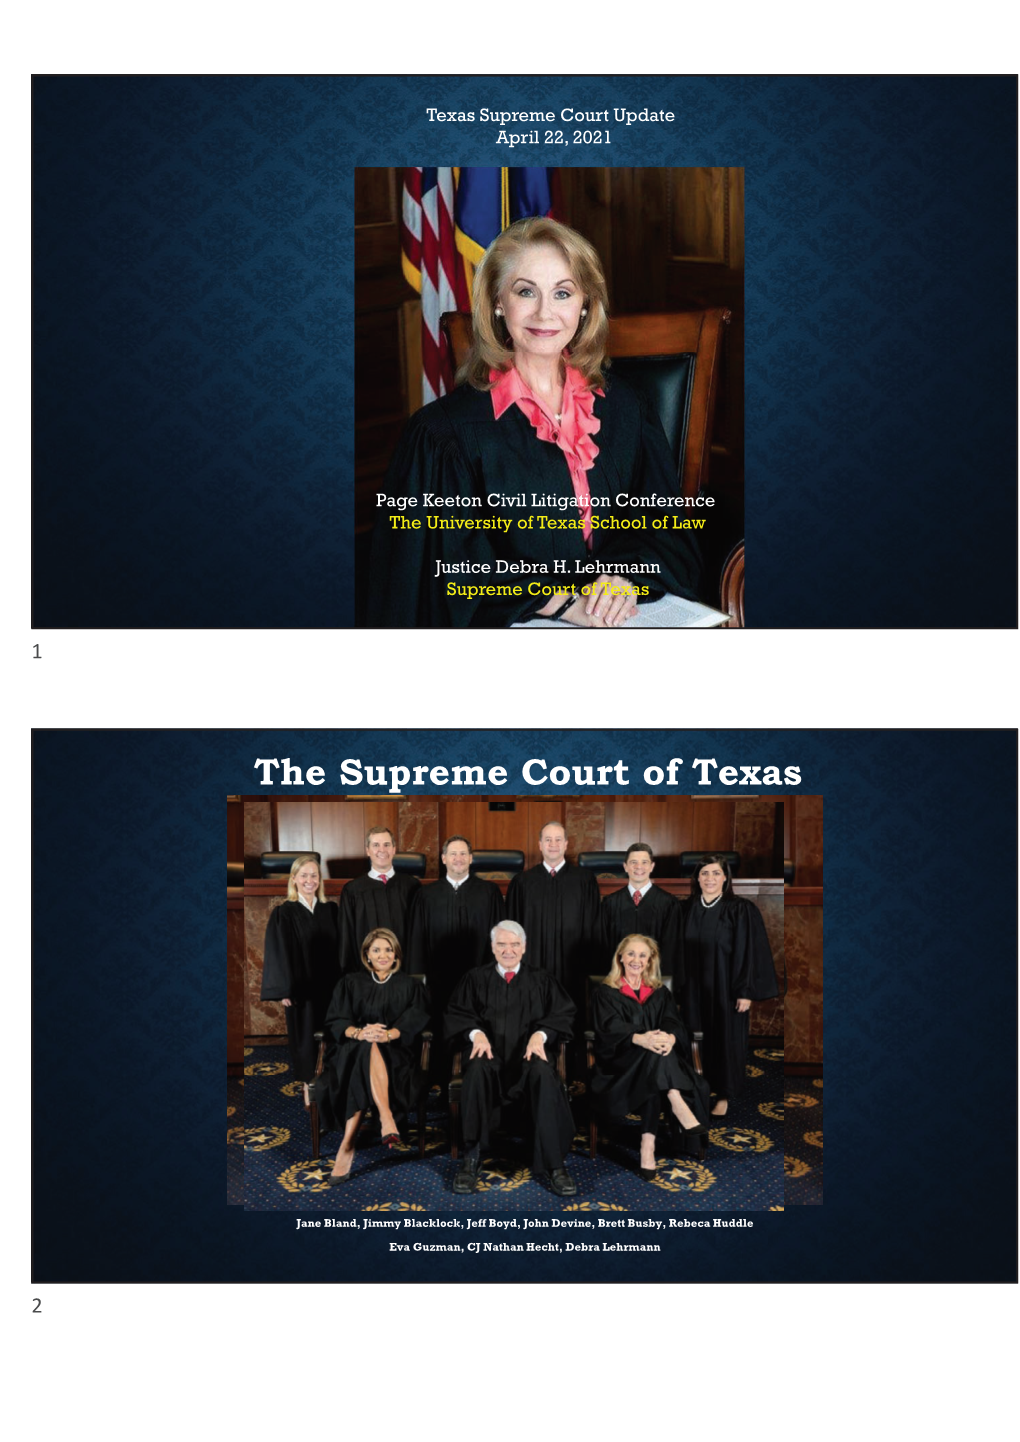 The Supreme Court of Texas